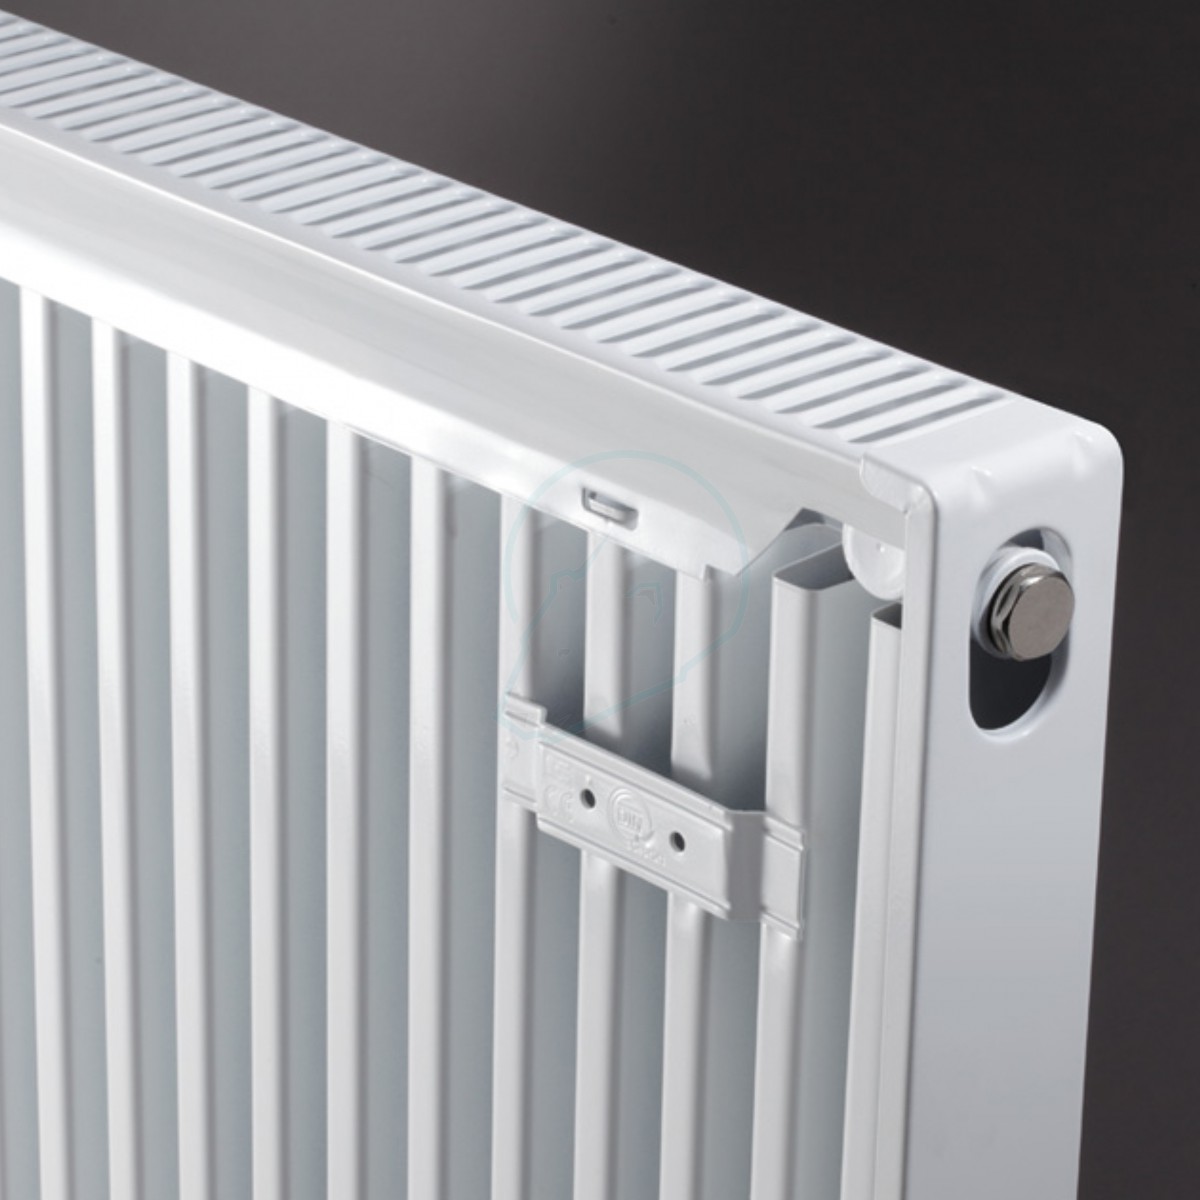 How to choose the right size radiator for your bathroom